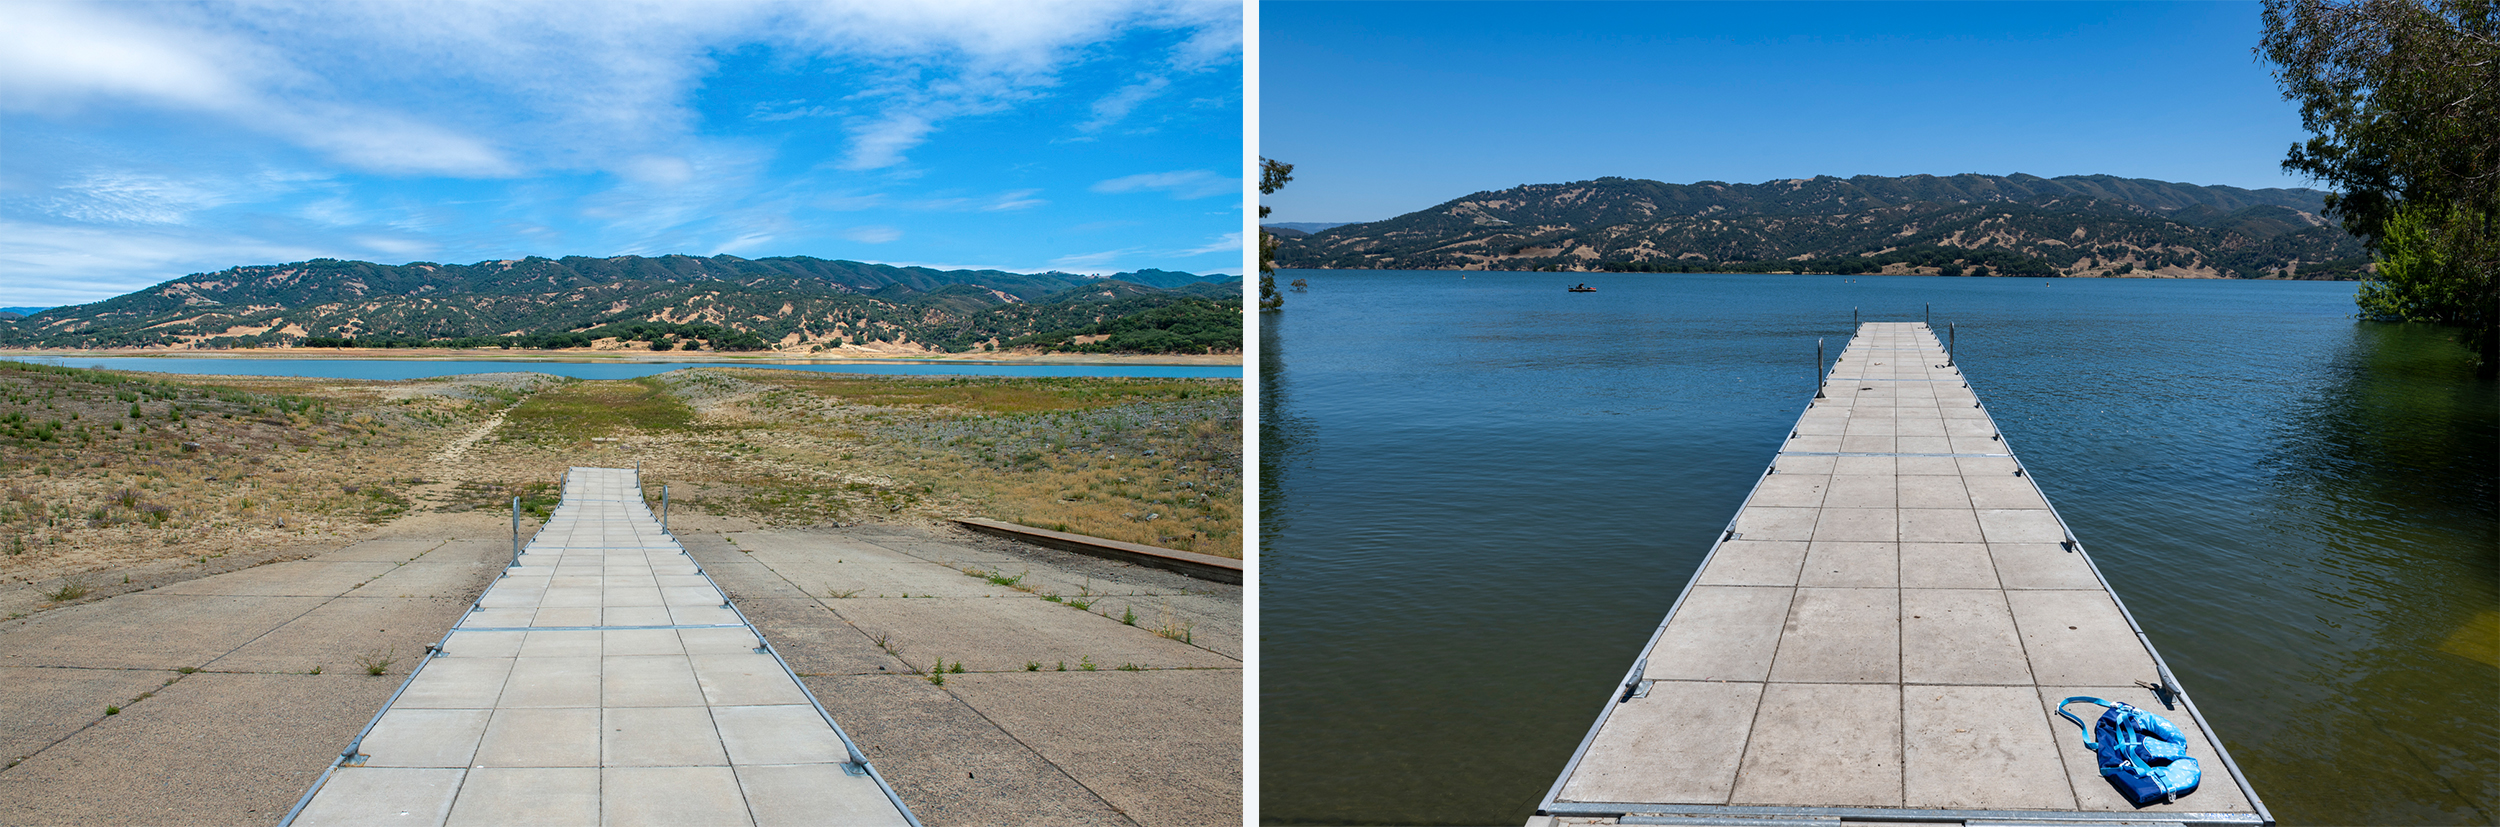 Two photos of the boat dock at different points in time. On the left, the dock sits on the floor of the dried out lake bed. On the right, it floats on top of the water.